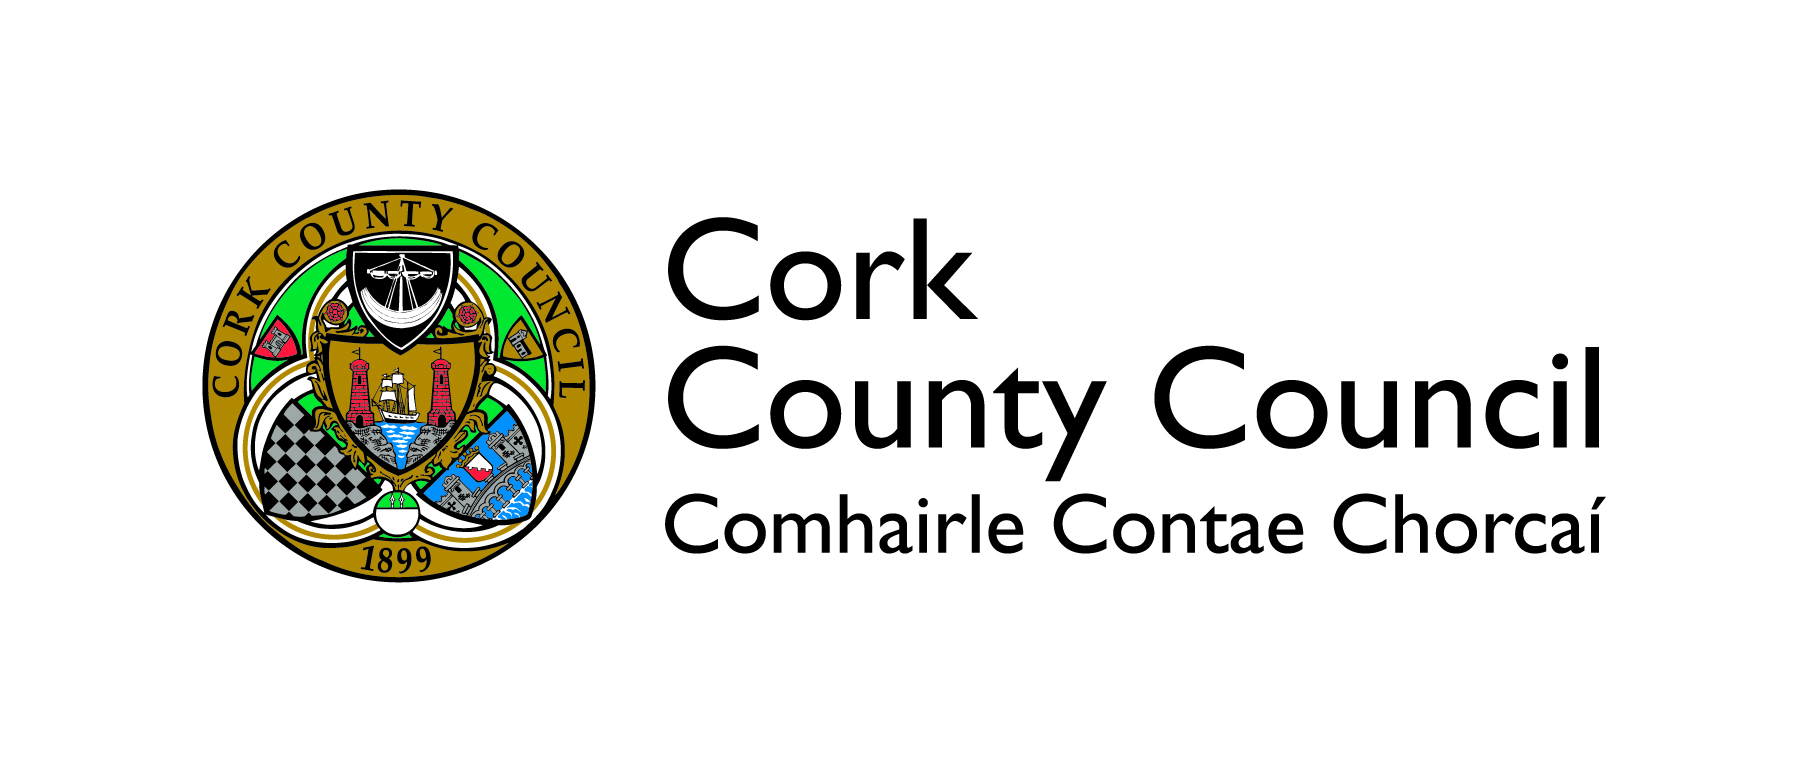 Cork’s Councils embark on awareness campaign in advance of the changes to Cork City’s boundary